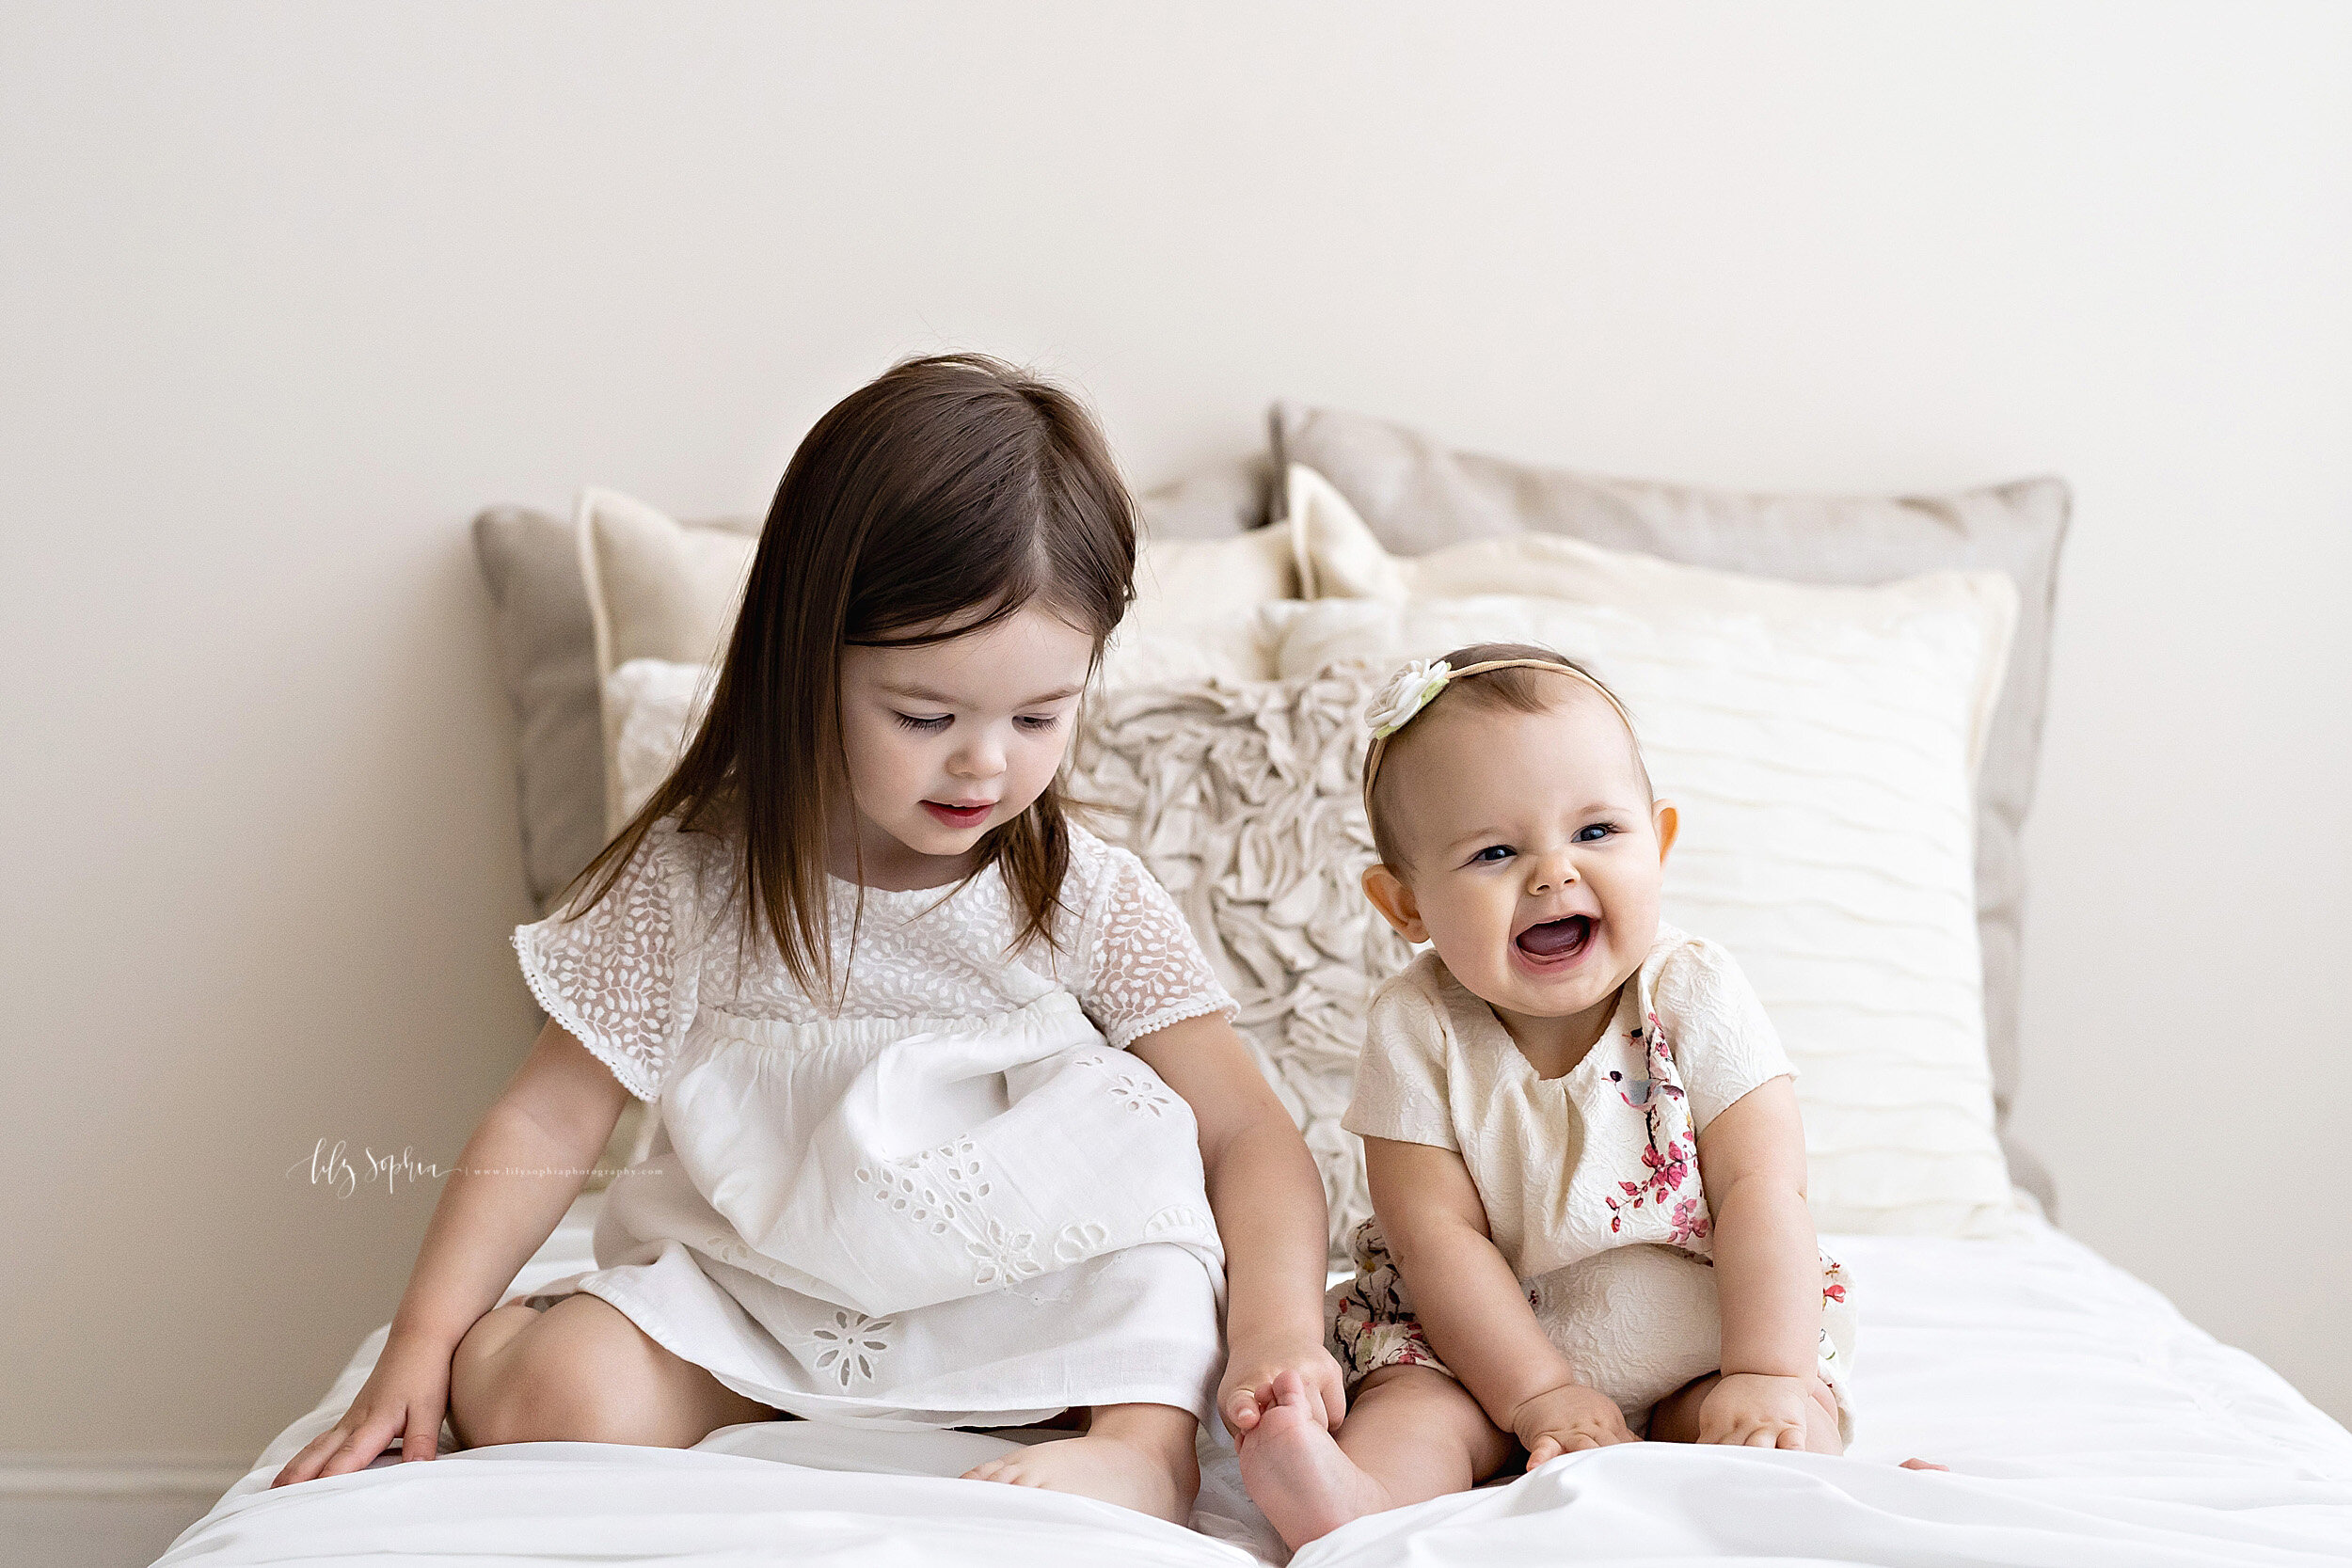  Family photo of sibling girls sitting next to each other on a bed in front of a natural light window with the baby wearing a rose headband and laughing because her sister is tickling her toes taken in a Midtown studio in Atlanta. 